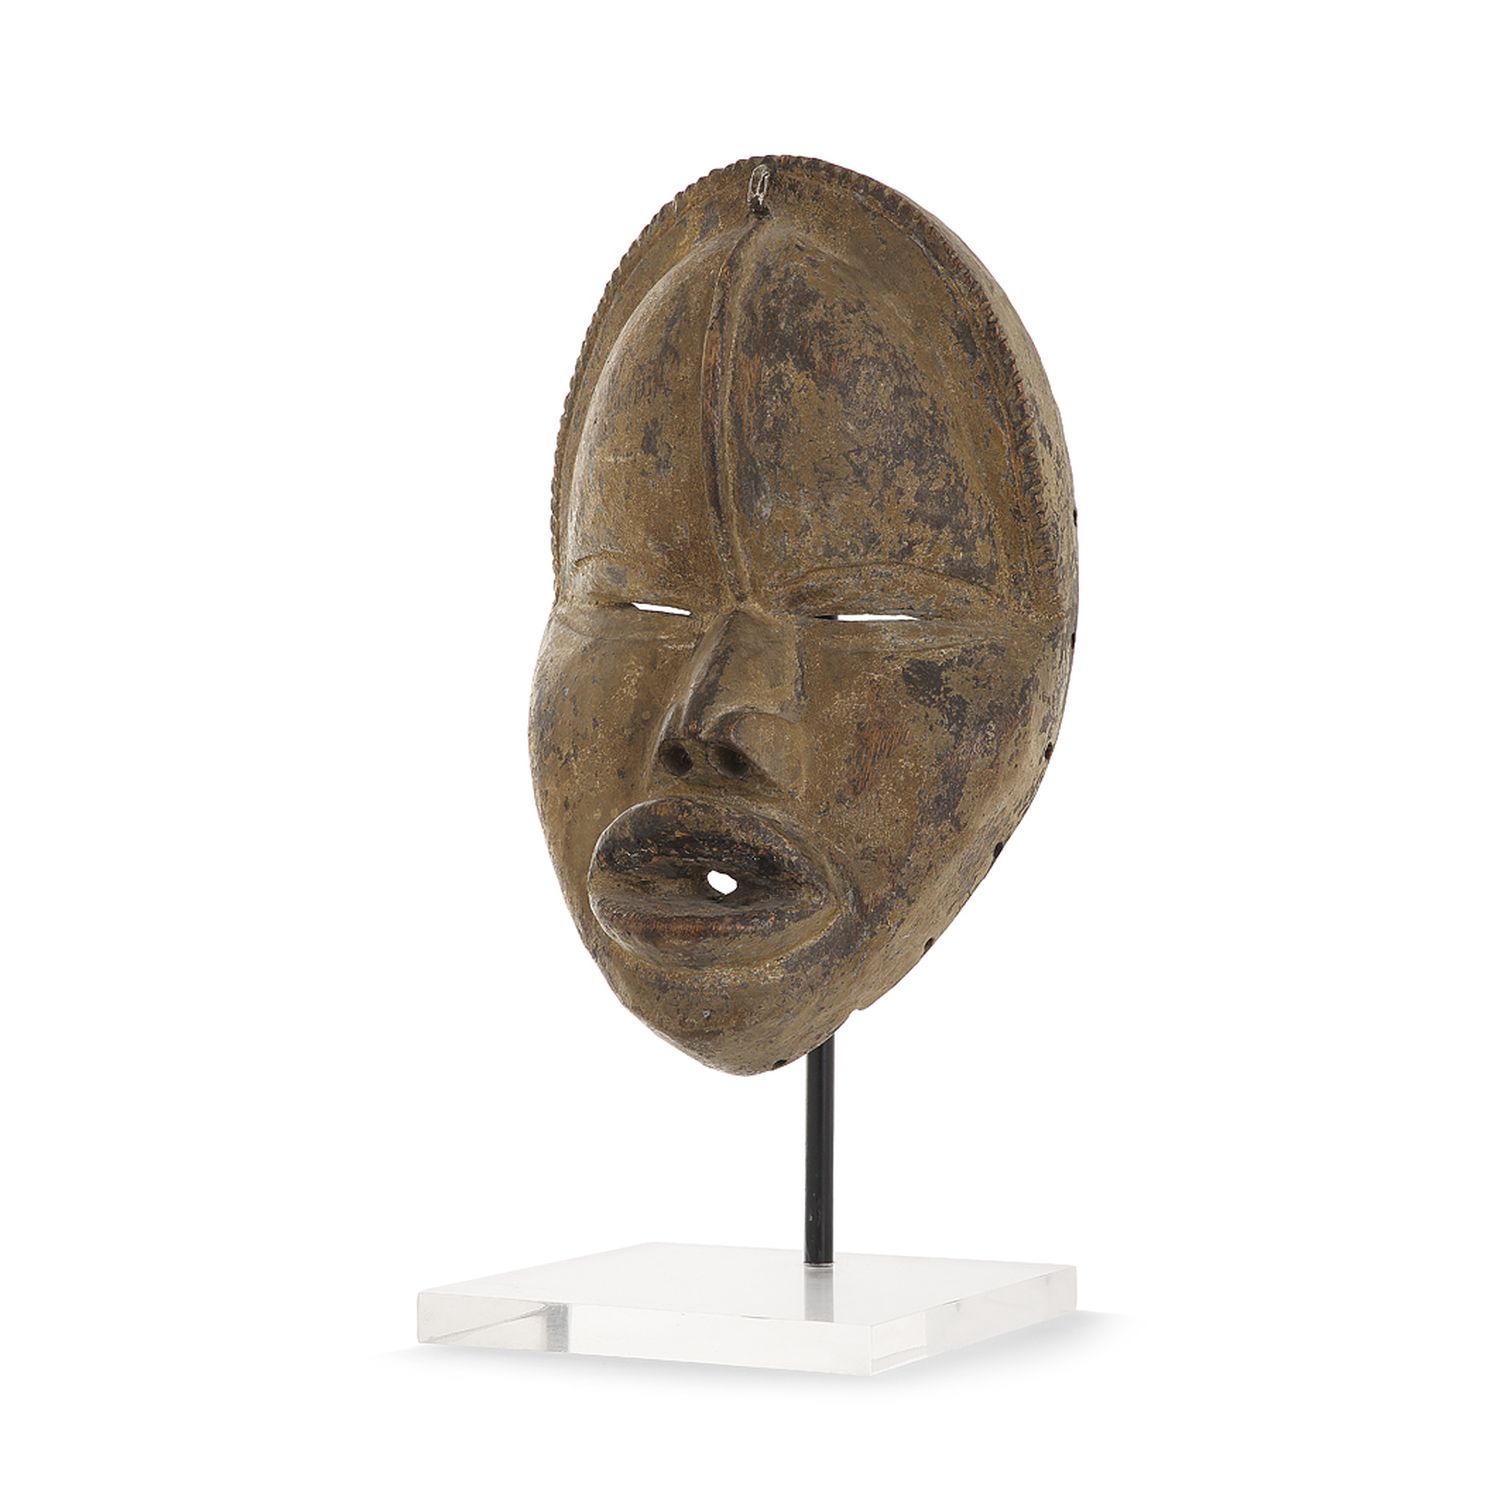 Null DAN STYLE DECORATION MASK, CÔTE D'IVOIRE
wood with crumbling patina
(Wear)
&hellip;